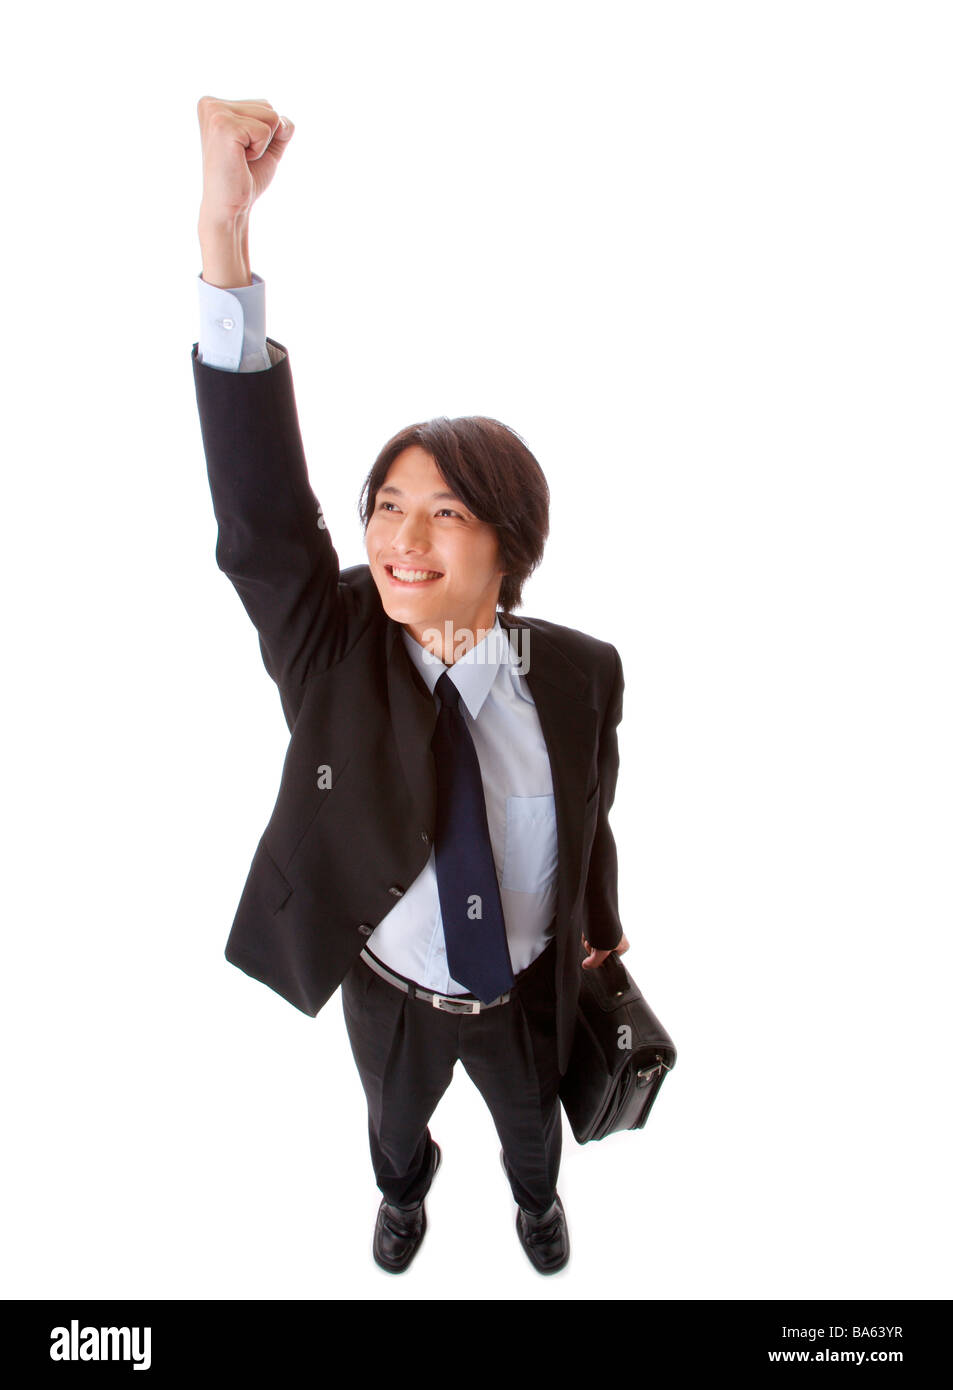 Businessman standing with fist up smiling high angle view Banque D'Images